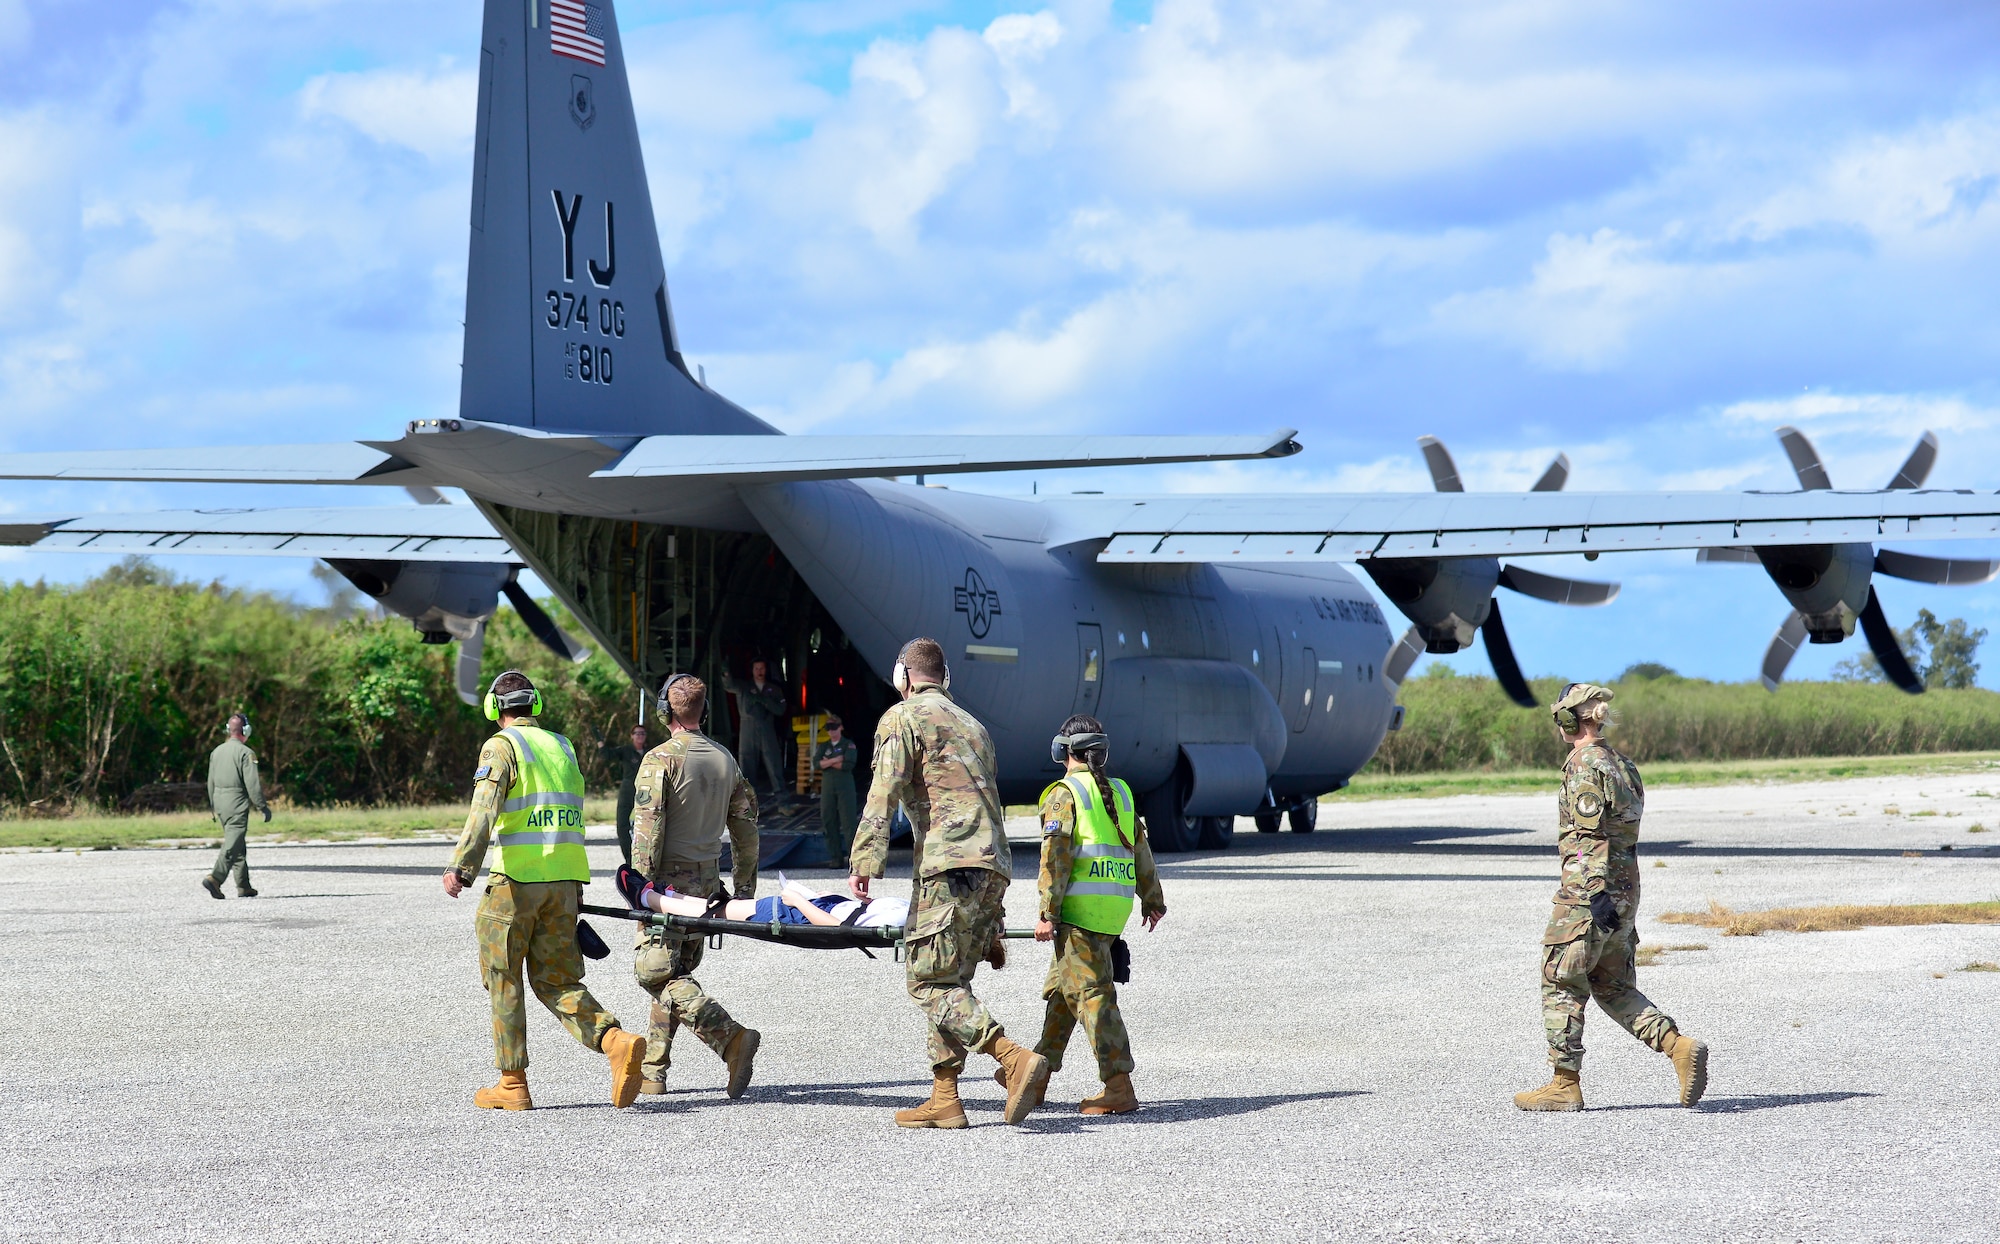 U.S. Air Force (USAF), Koku Jieitai (Japan Air Self-Defense) and Royal Australian Air Force members (RAAF) utilize a USAF C-130J Super Hercules  to perform logistical re-supply, medical evacuation, troop movement and humanitarian assistance during exercise COPE NORTH 18 at Tinian, U.S. Commonwealth of the Northern Marianas Islands, Feb. 19. Through exercises and engagements during COPE NORTH, USAF, Koku Jieitai and RAAF increase interoperability for humanitarian assistance/disaster relief operations. (U.S. Air Force photo by Airman 1st Class Christopher Quail)